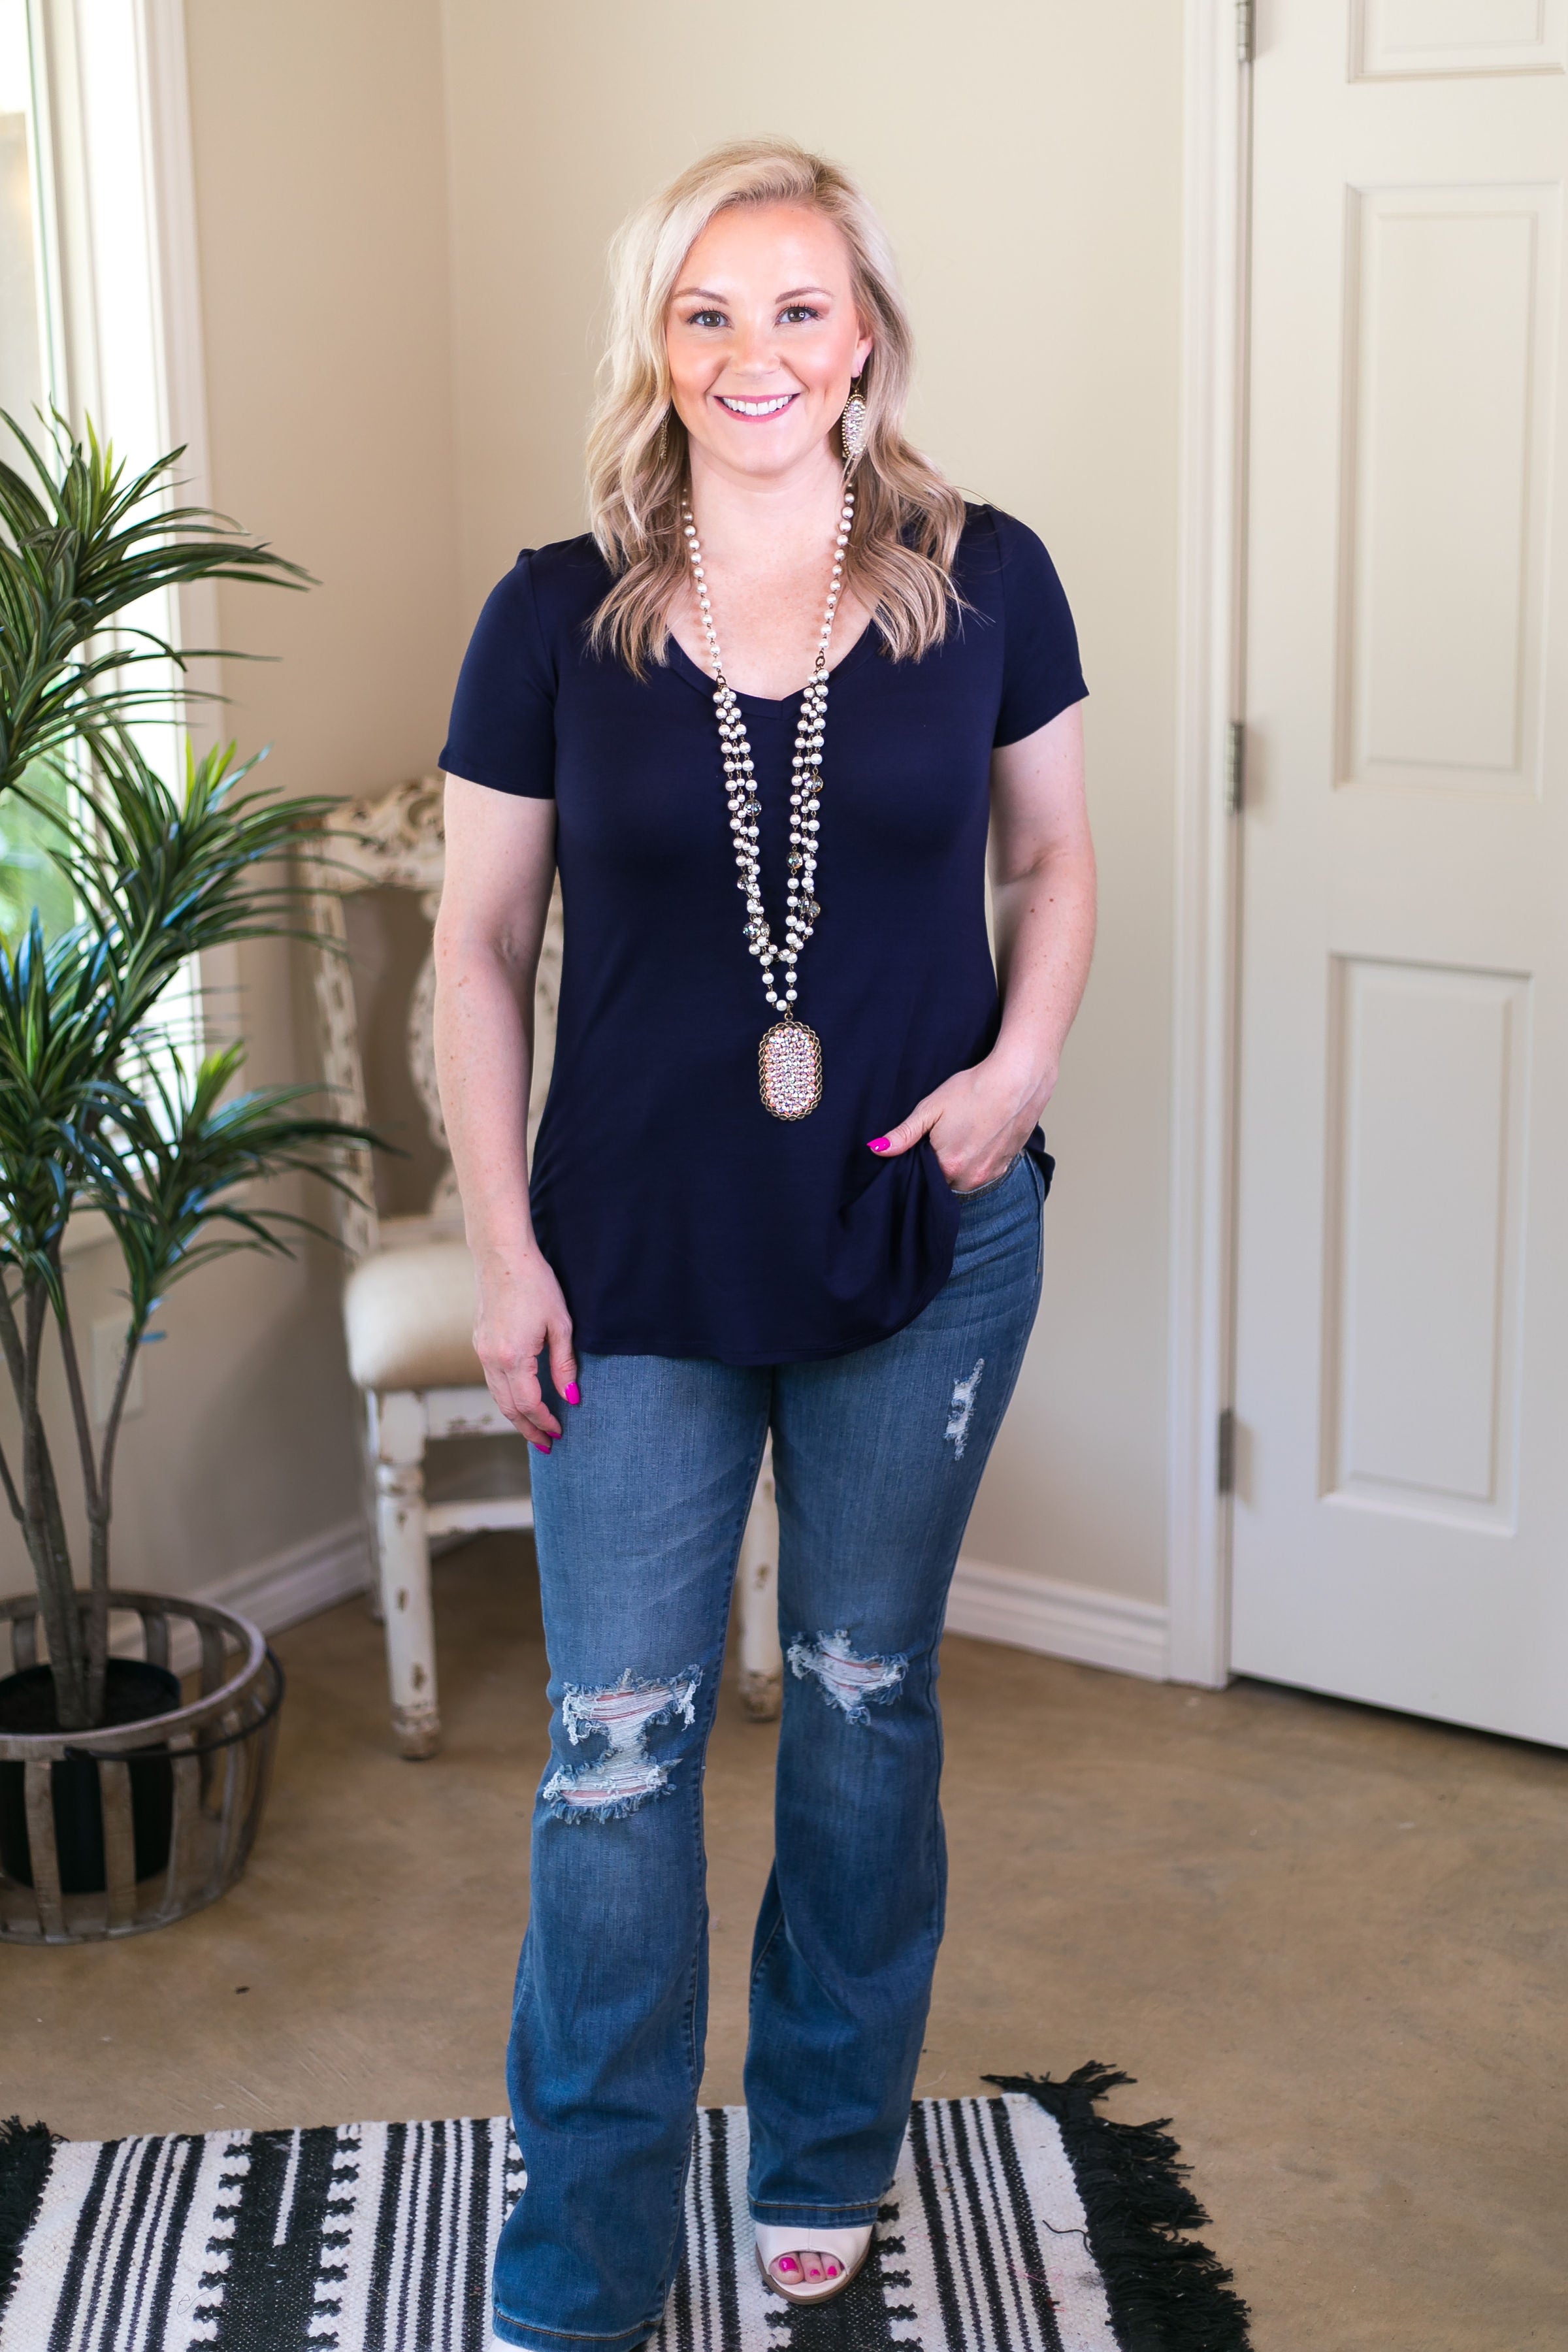 Simply The Best V Neck Short Sleeve Tee Shirt in Navy Blue - Giddy Up Glamour Boutique